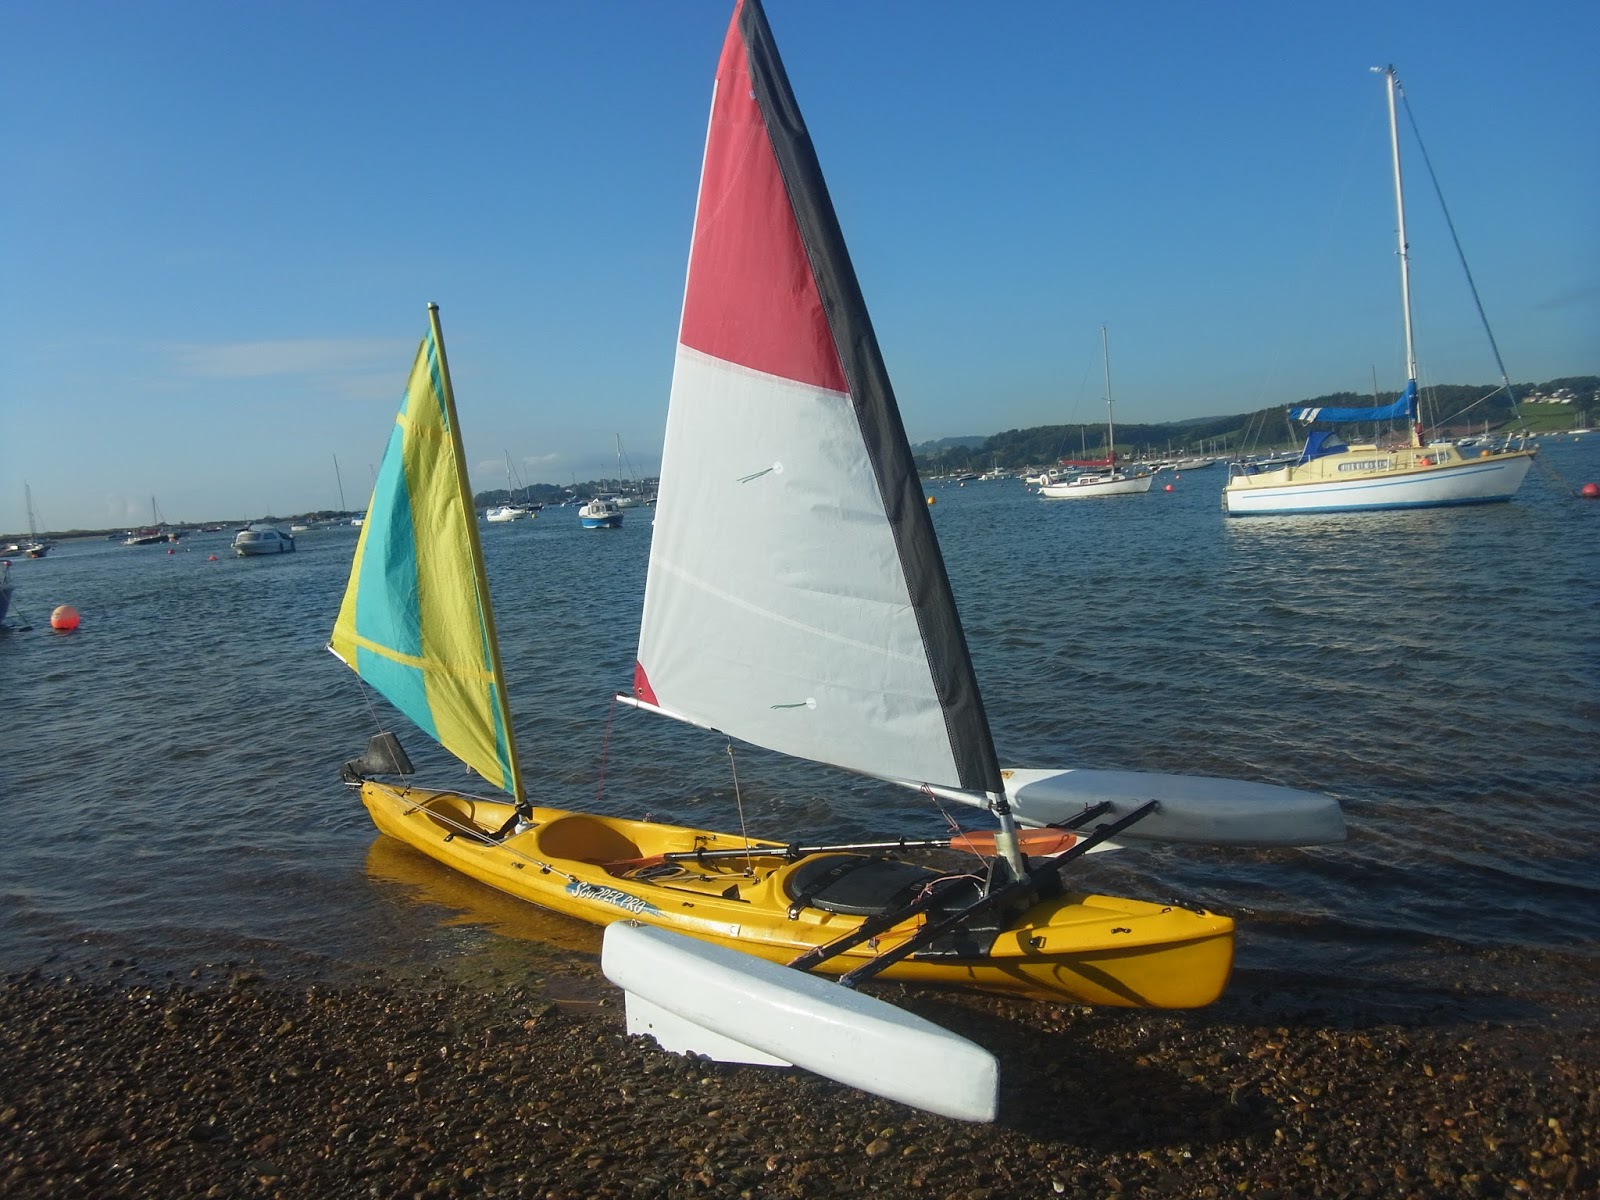 kayak sailing and boat building projects: september 2015